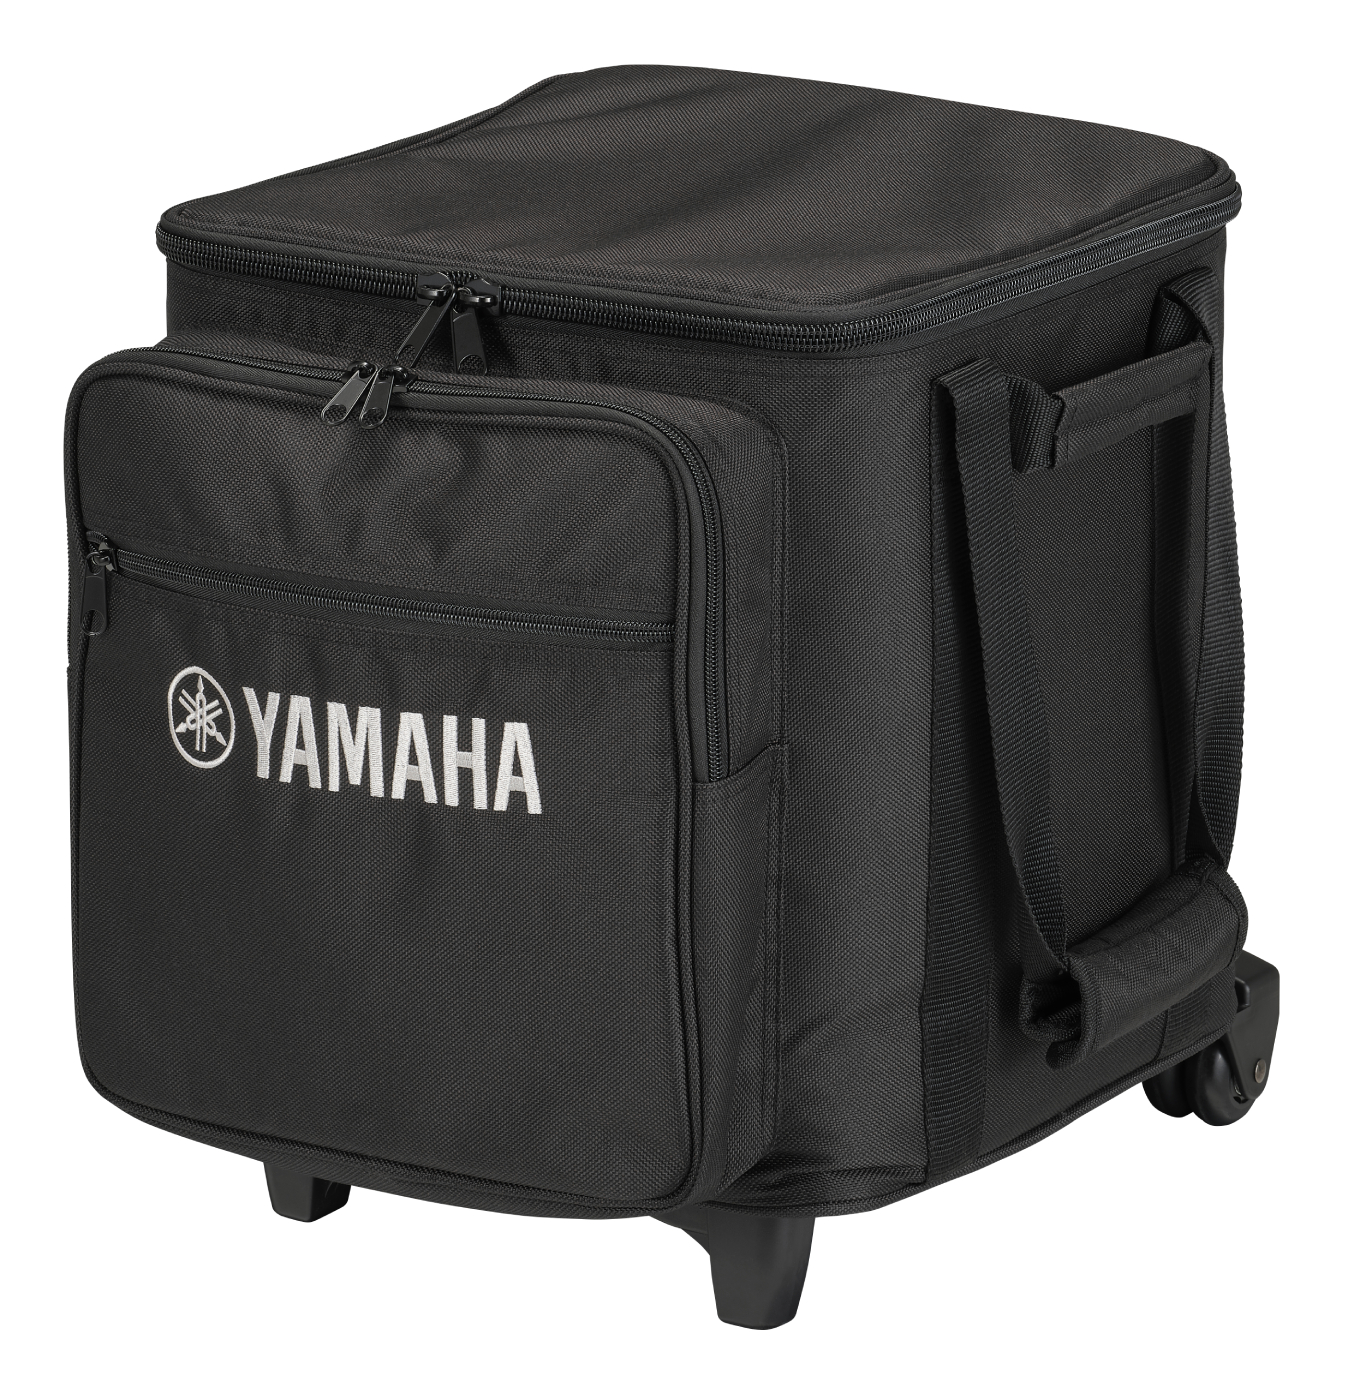 Yamaha Stagepas 200  + Valise Pour Stagepas 200 - Pack Sonorisation - Variation 2